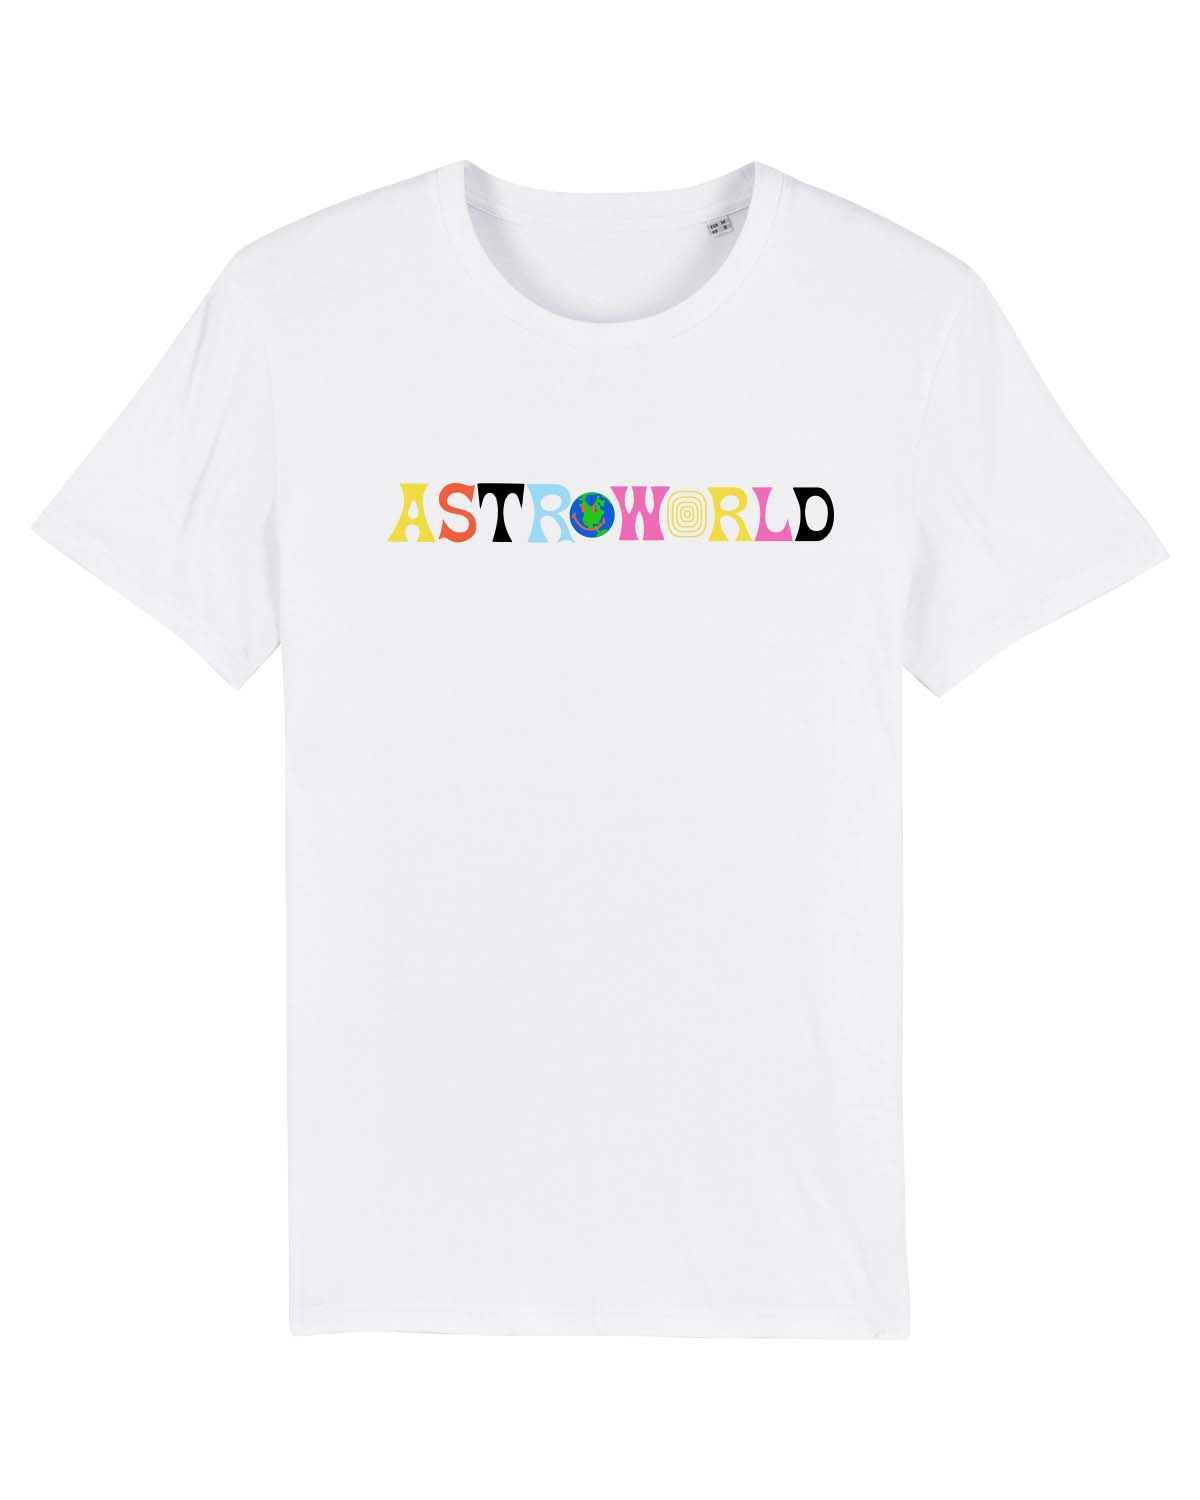 T shirt Astroworld Wish you were here